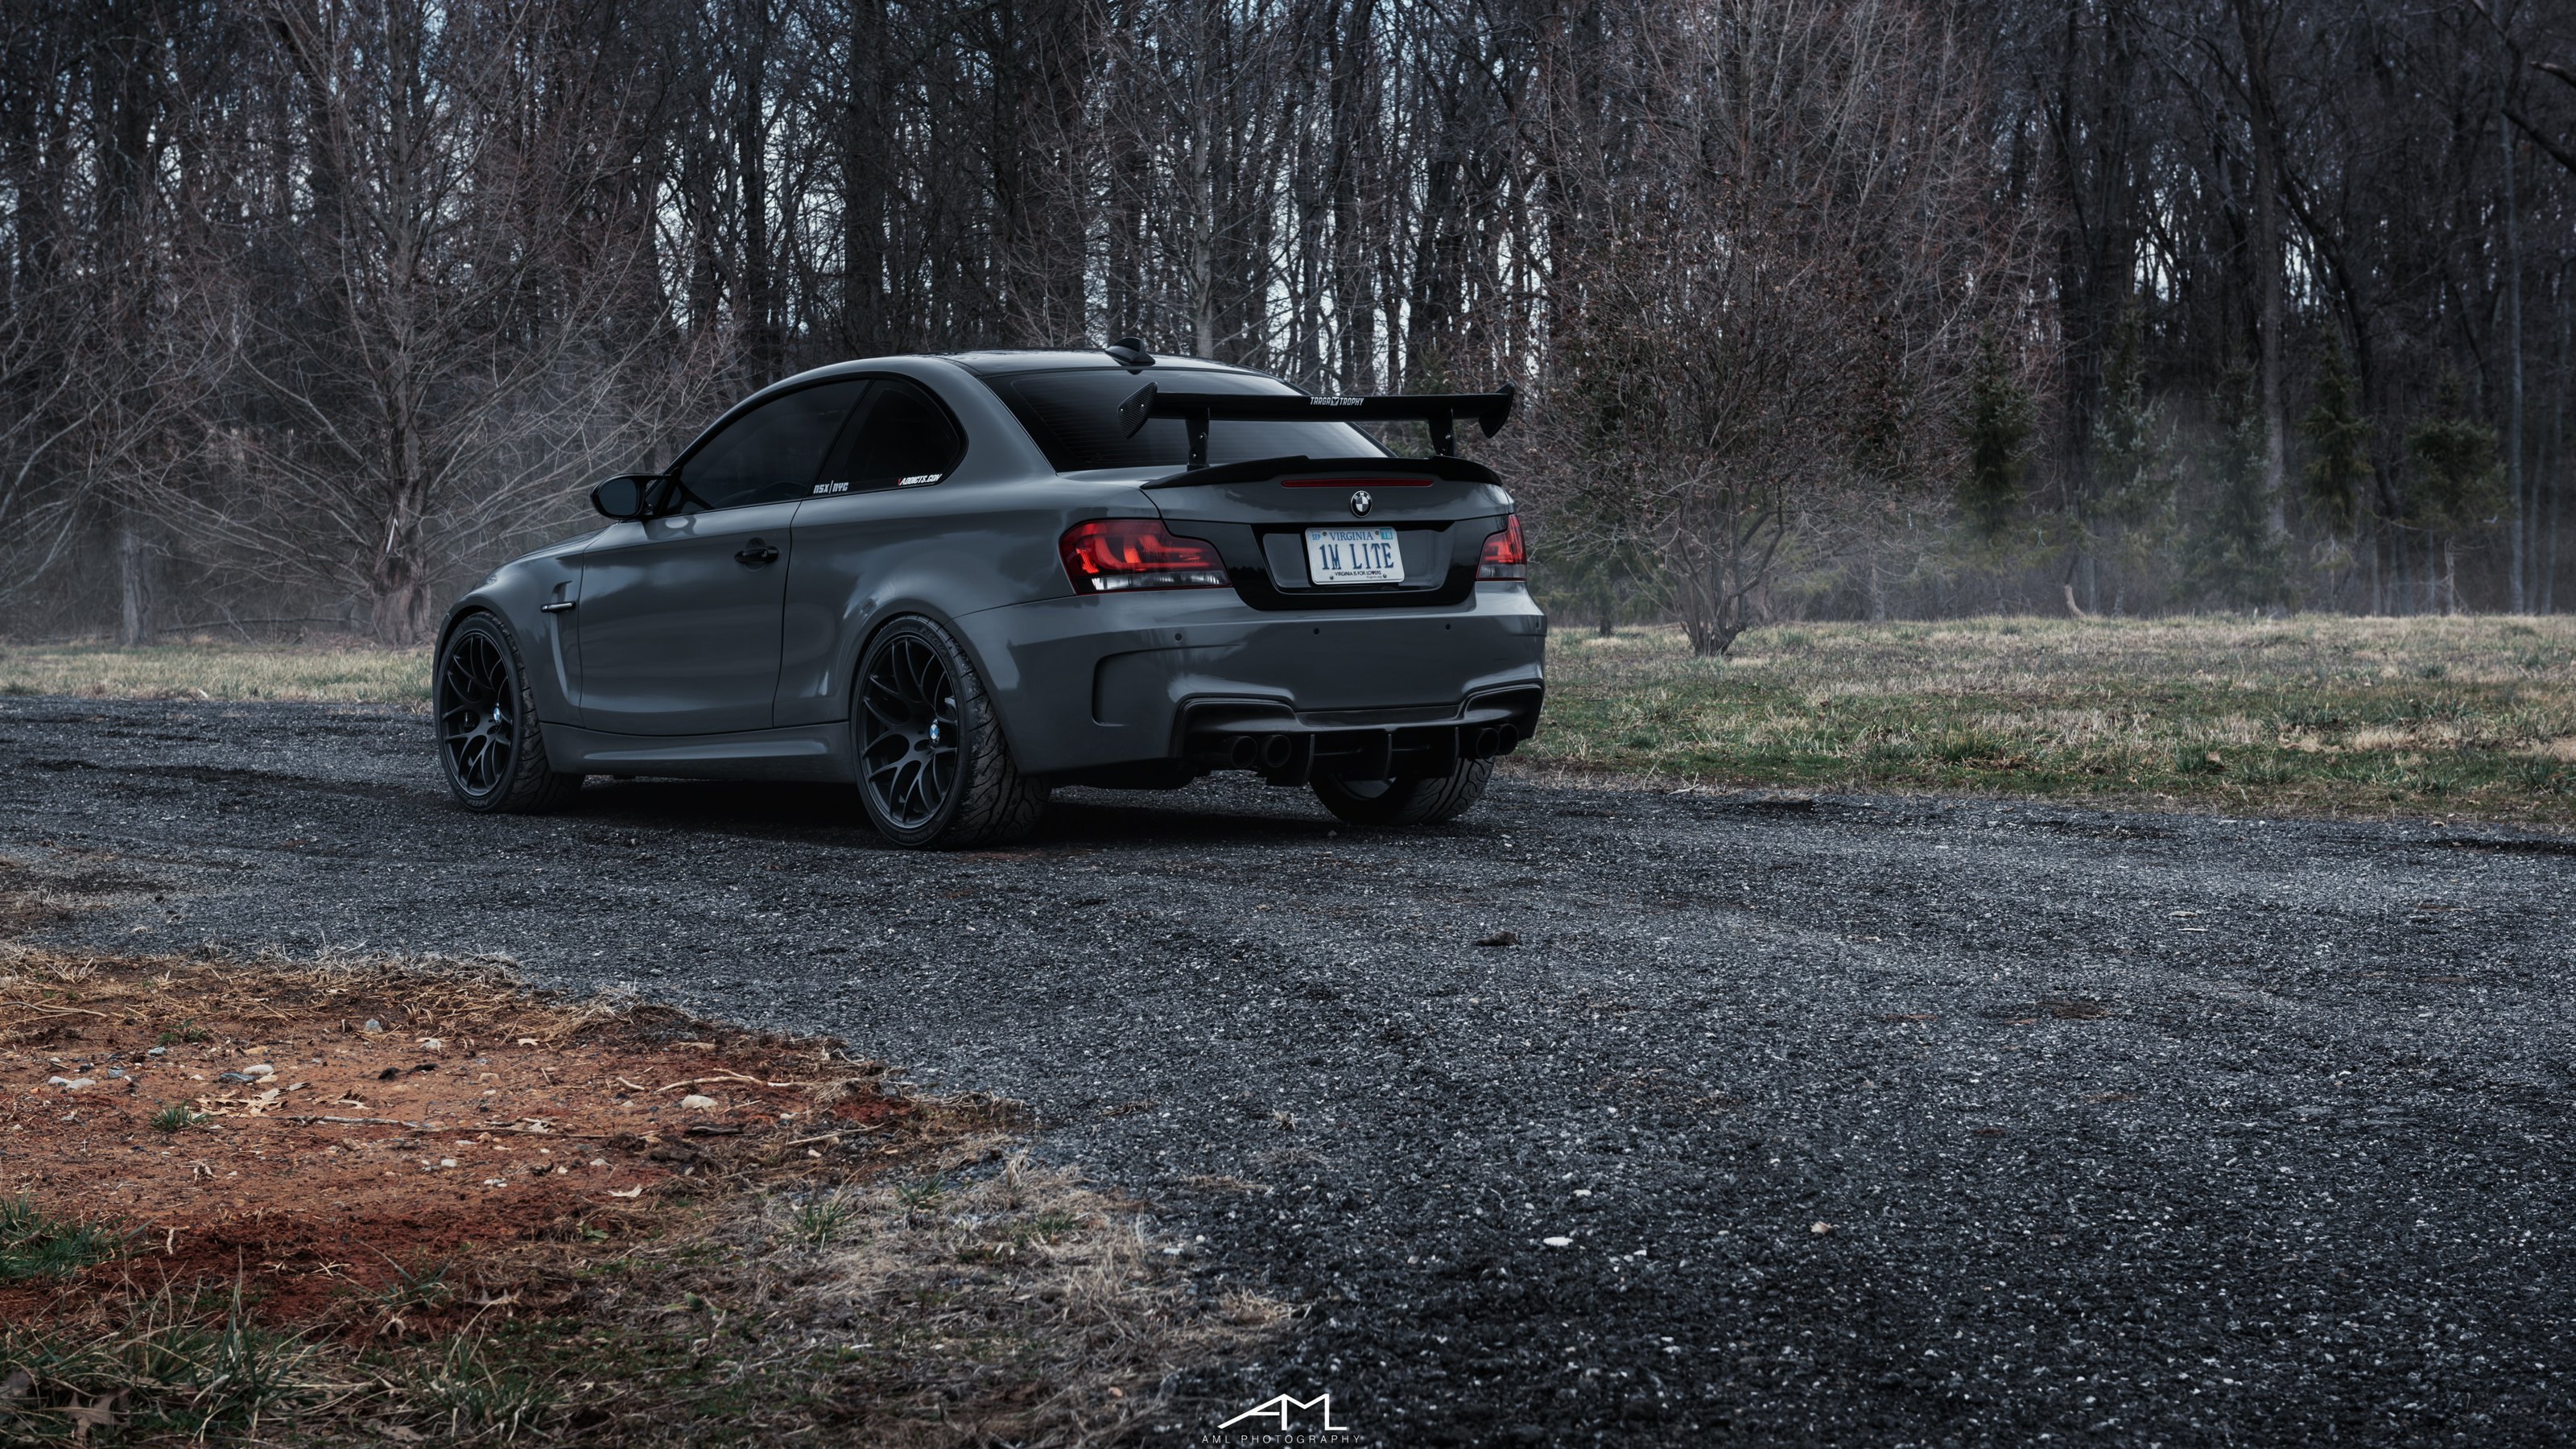 Large Wing Spoiler on Gray BMW 1-Series - Photo by Arlen Liverman